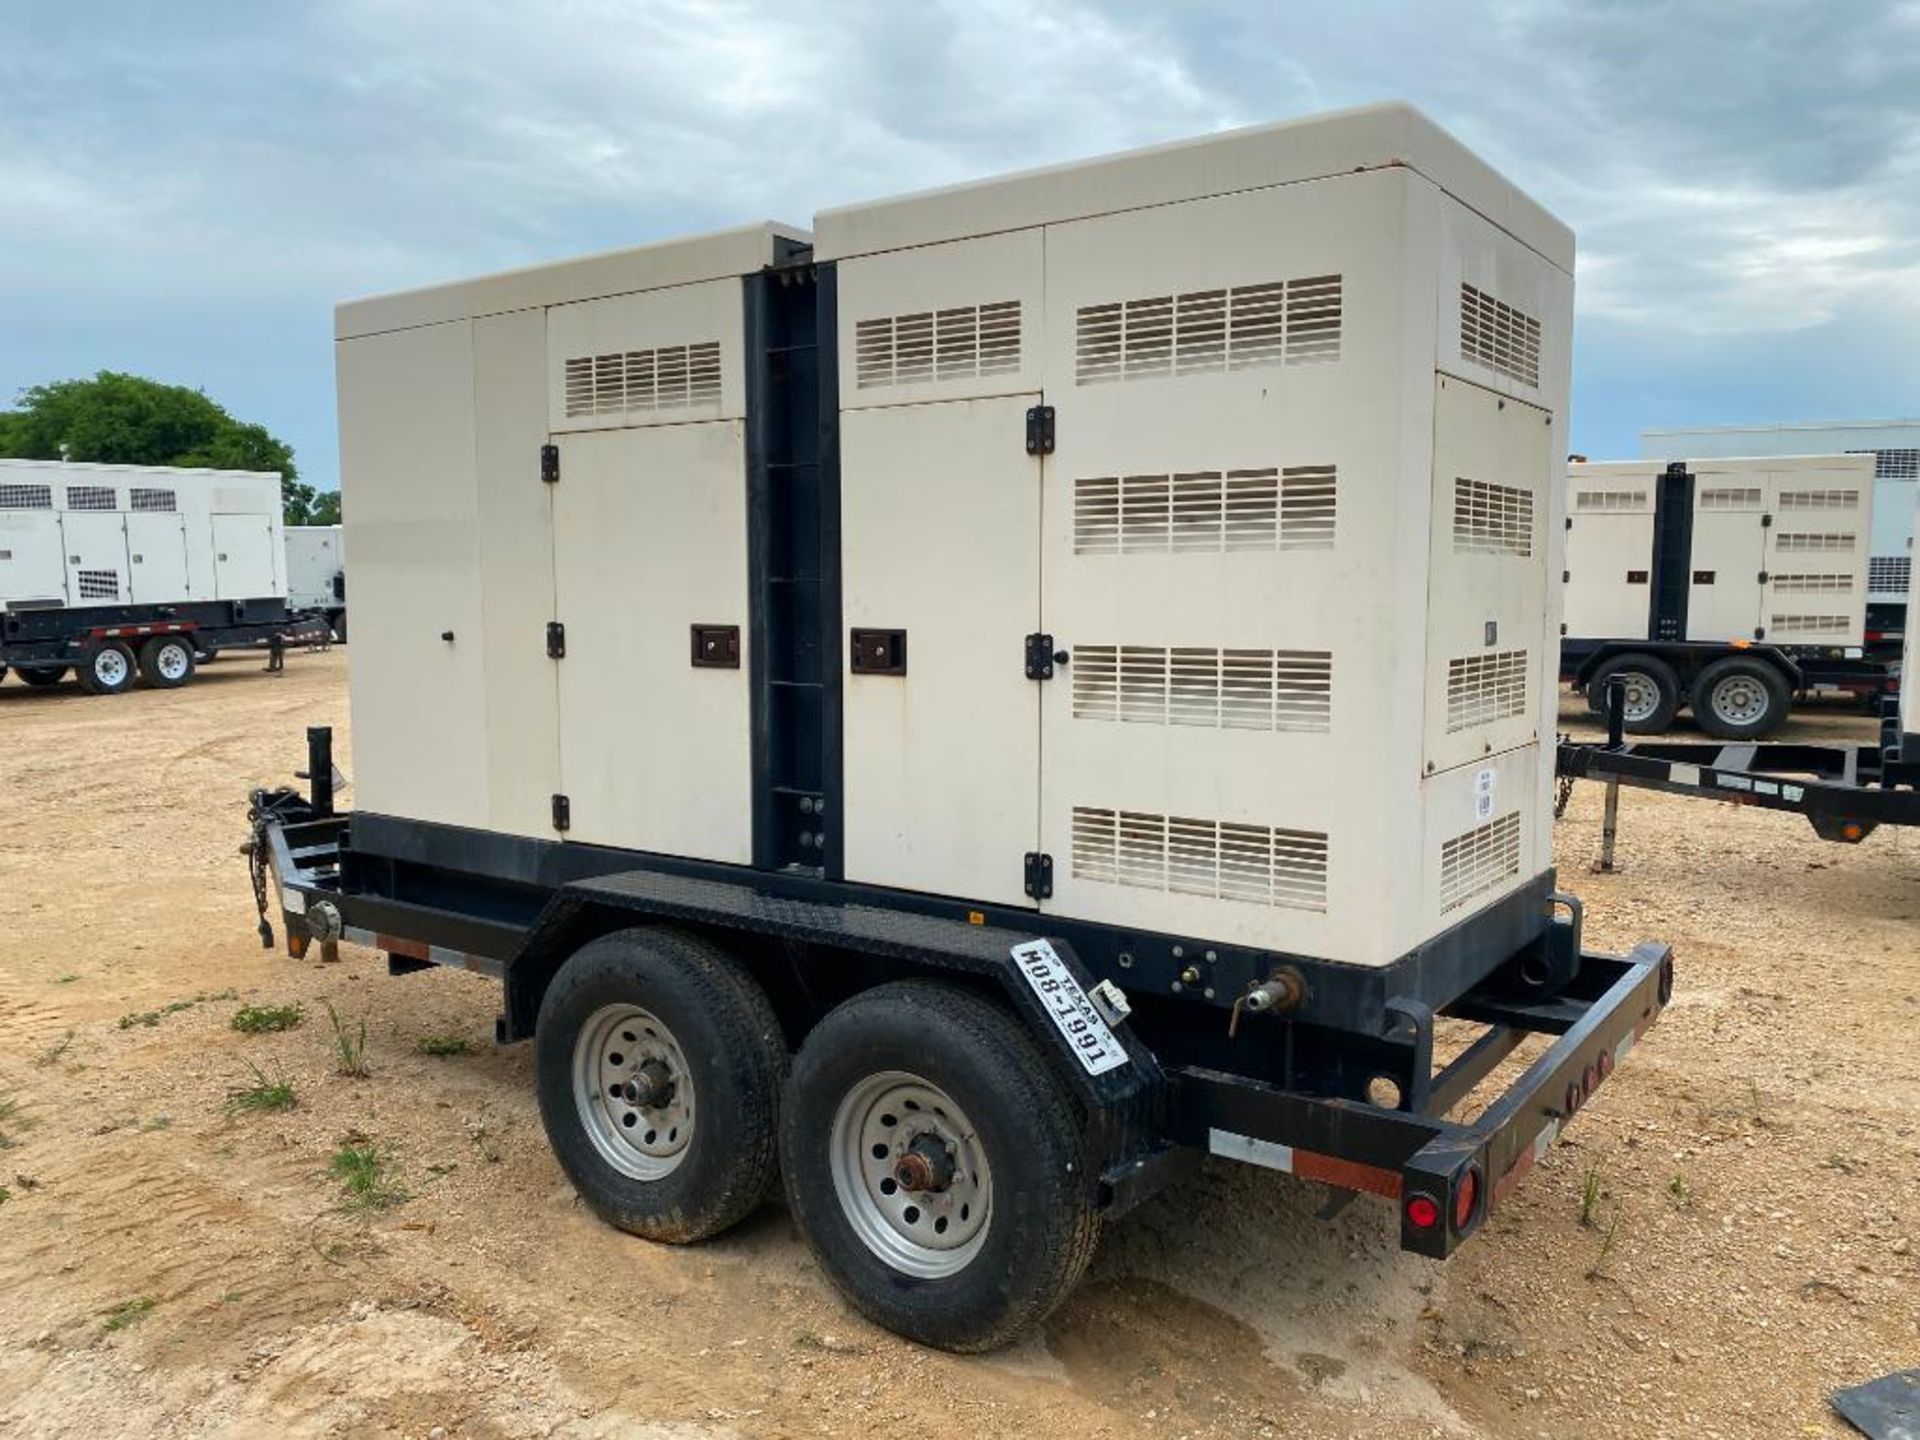 2014 AltaStream Power Systems 125 KVA Towable Generator, Dual Fuel Natural Gas or LP, Model APHG150- - Image 2 of 13